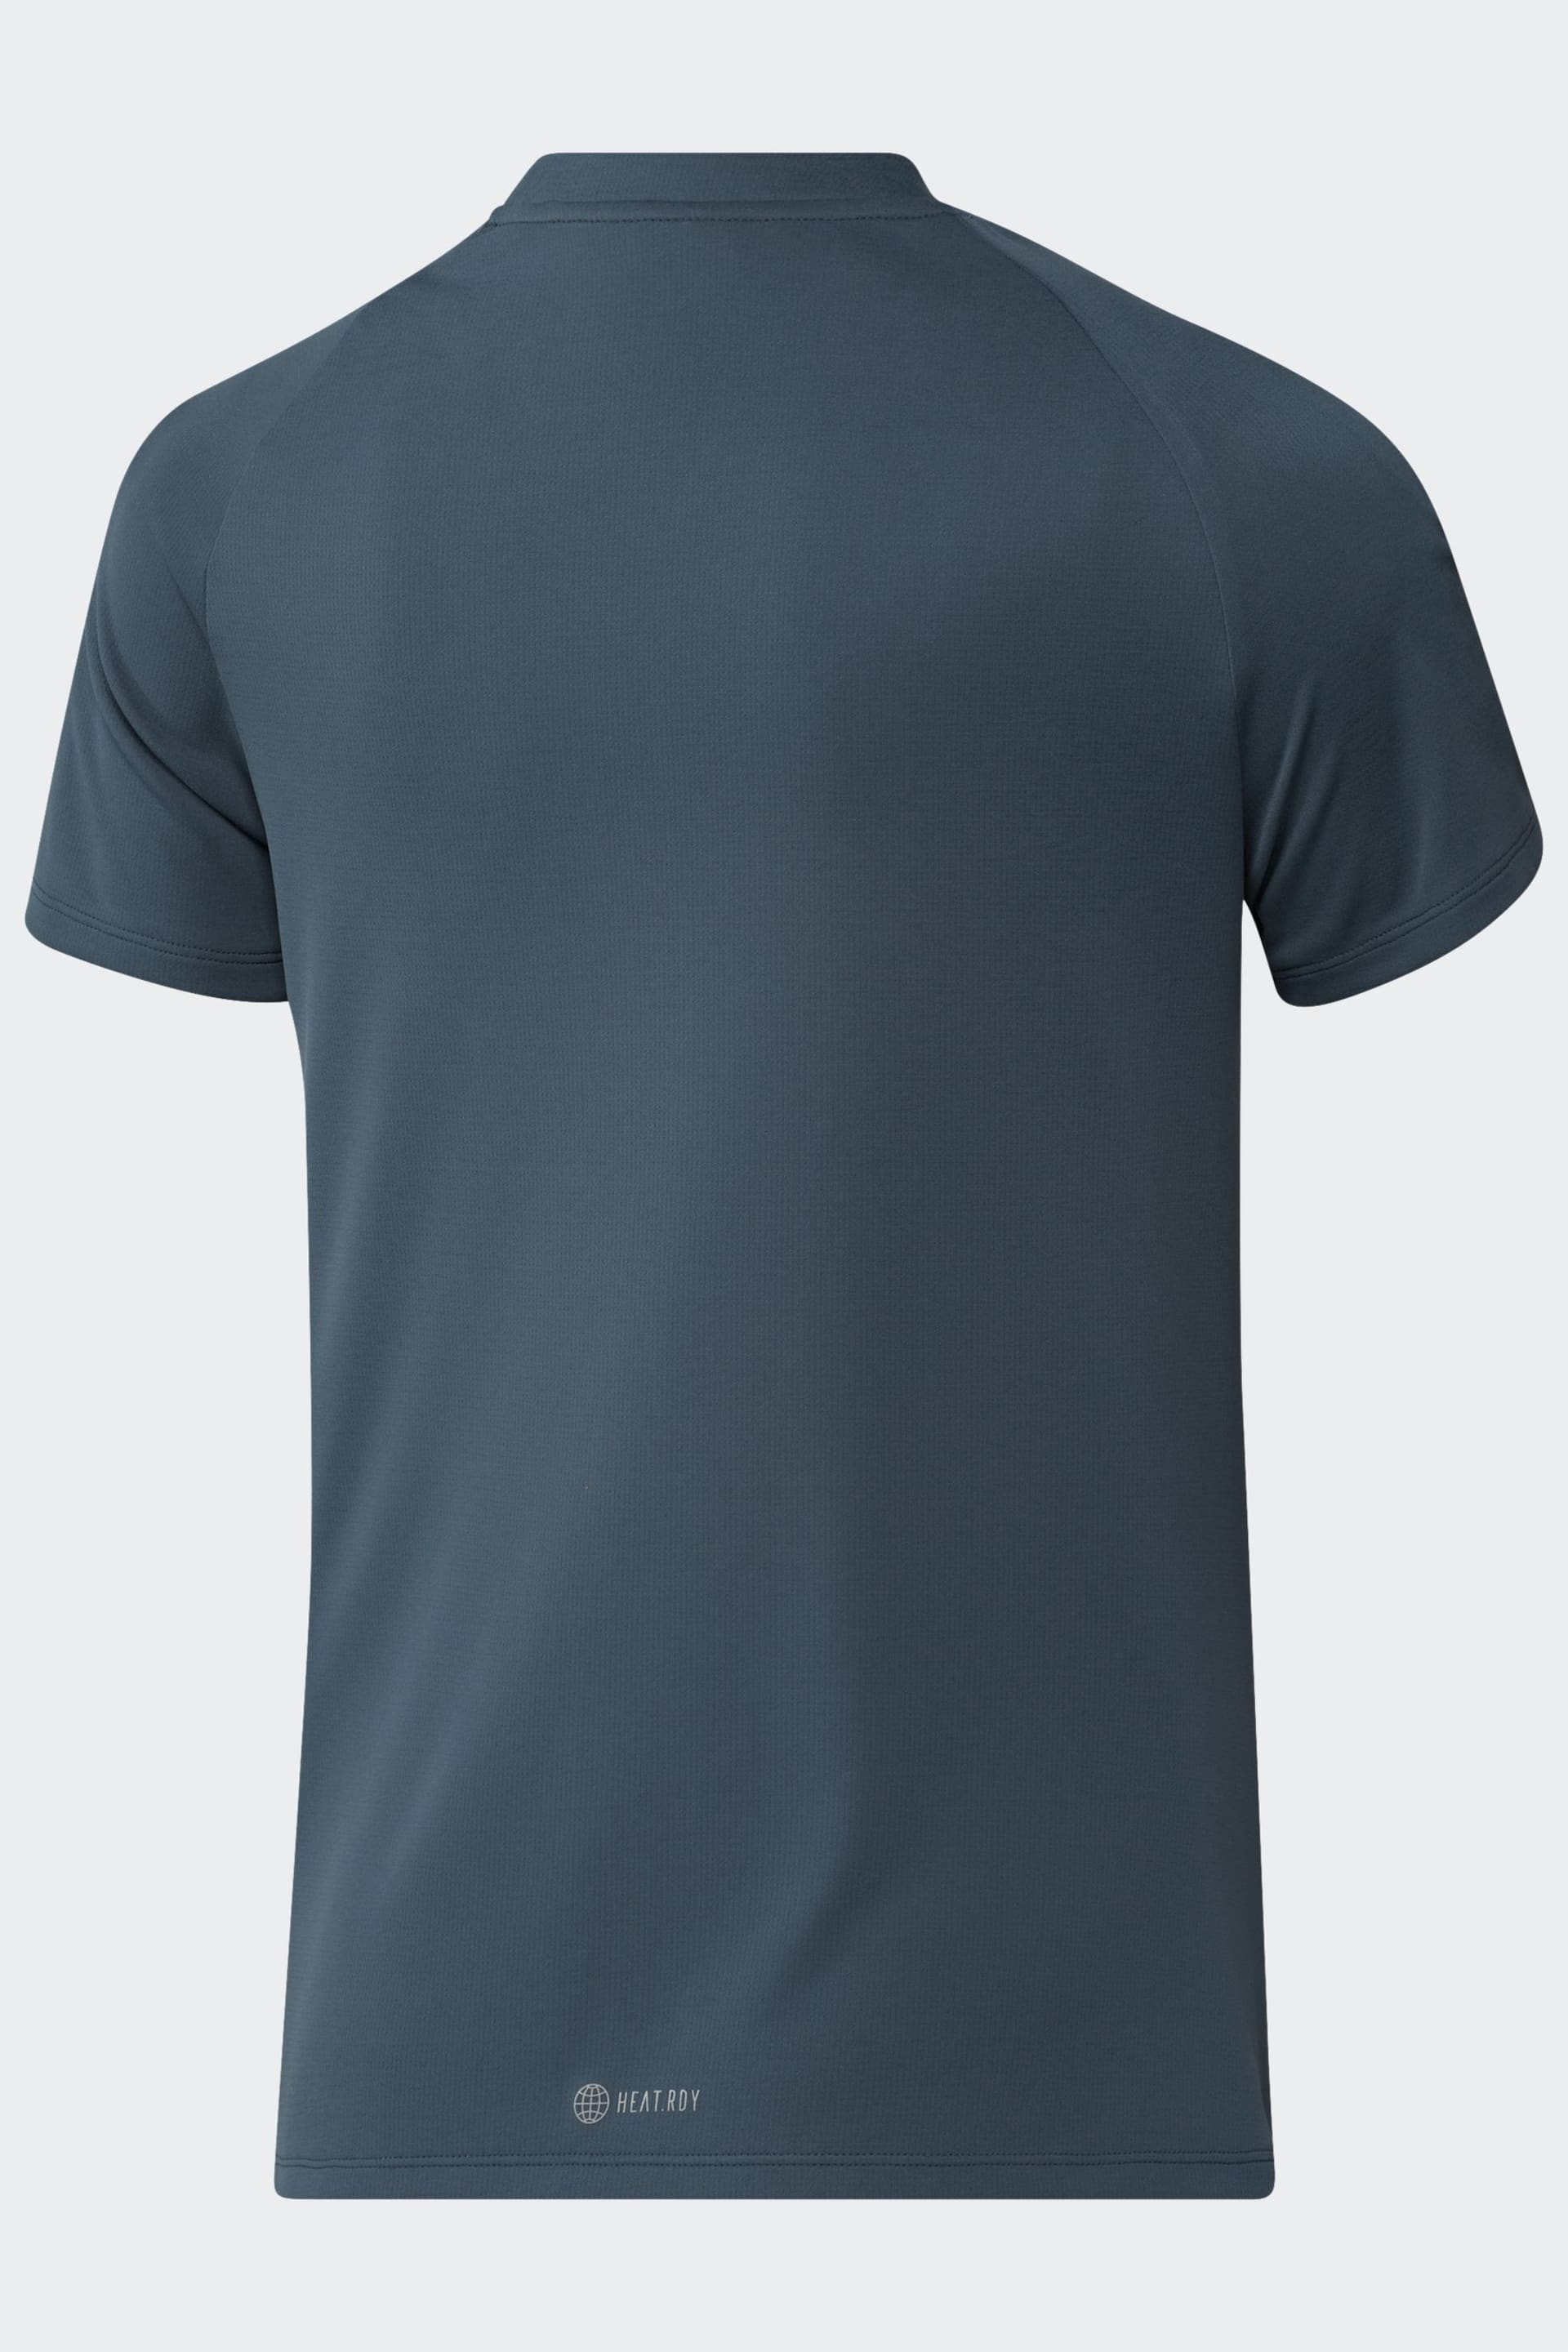 adidas Teal Blue Ultimate365 Tour Heat.rdy V-neck Top - Image 8 of 8